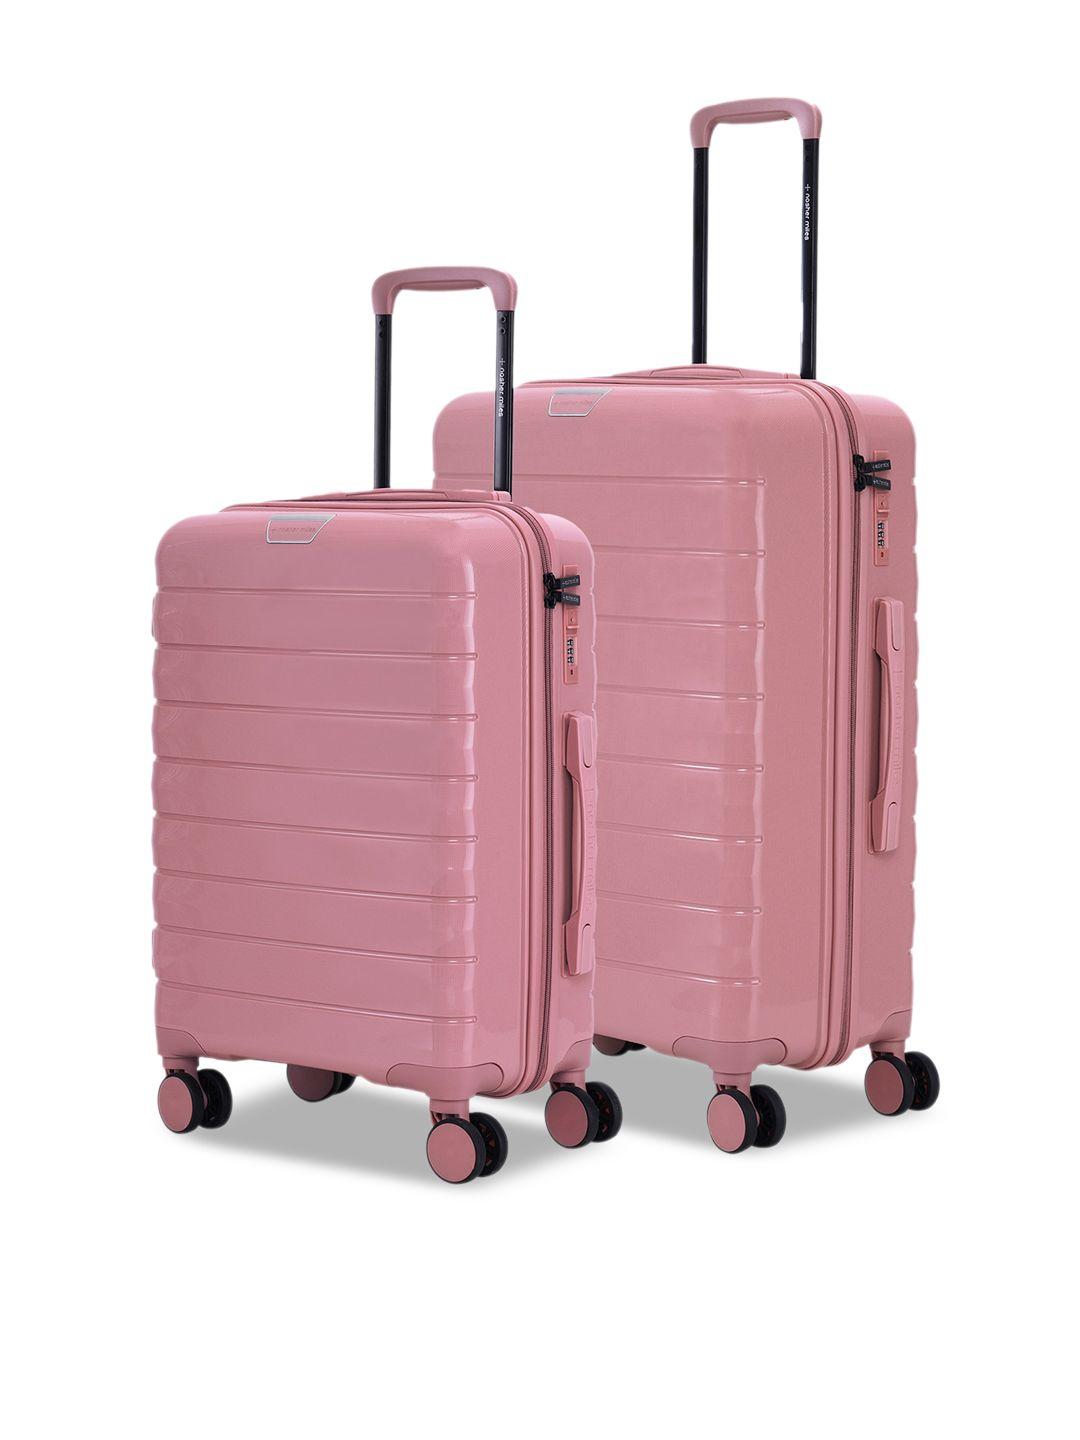 nasher miles vienna set of 2 hard-sided trolley suitcase - 113 l